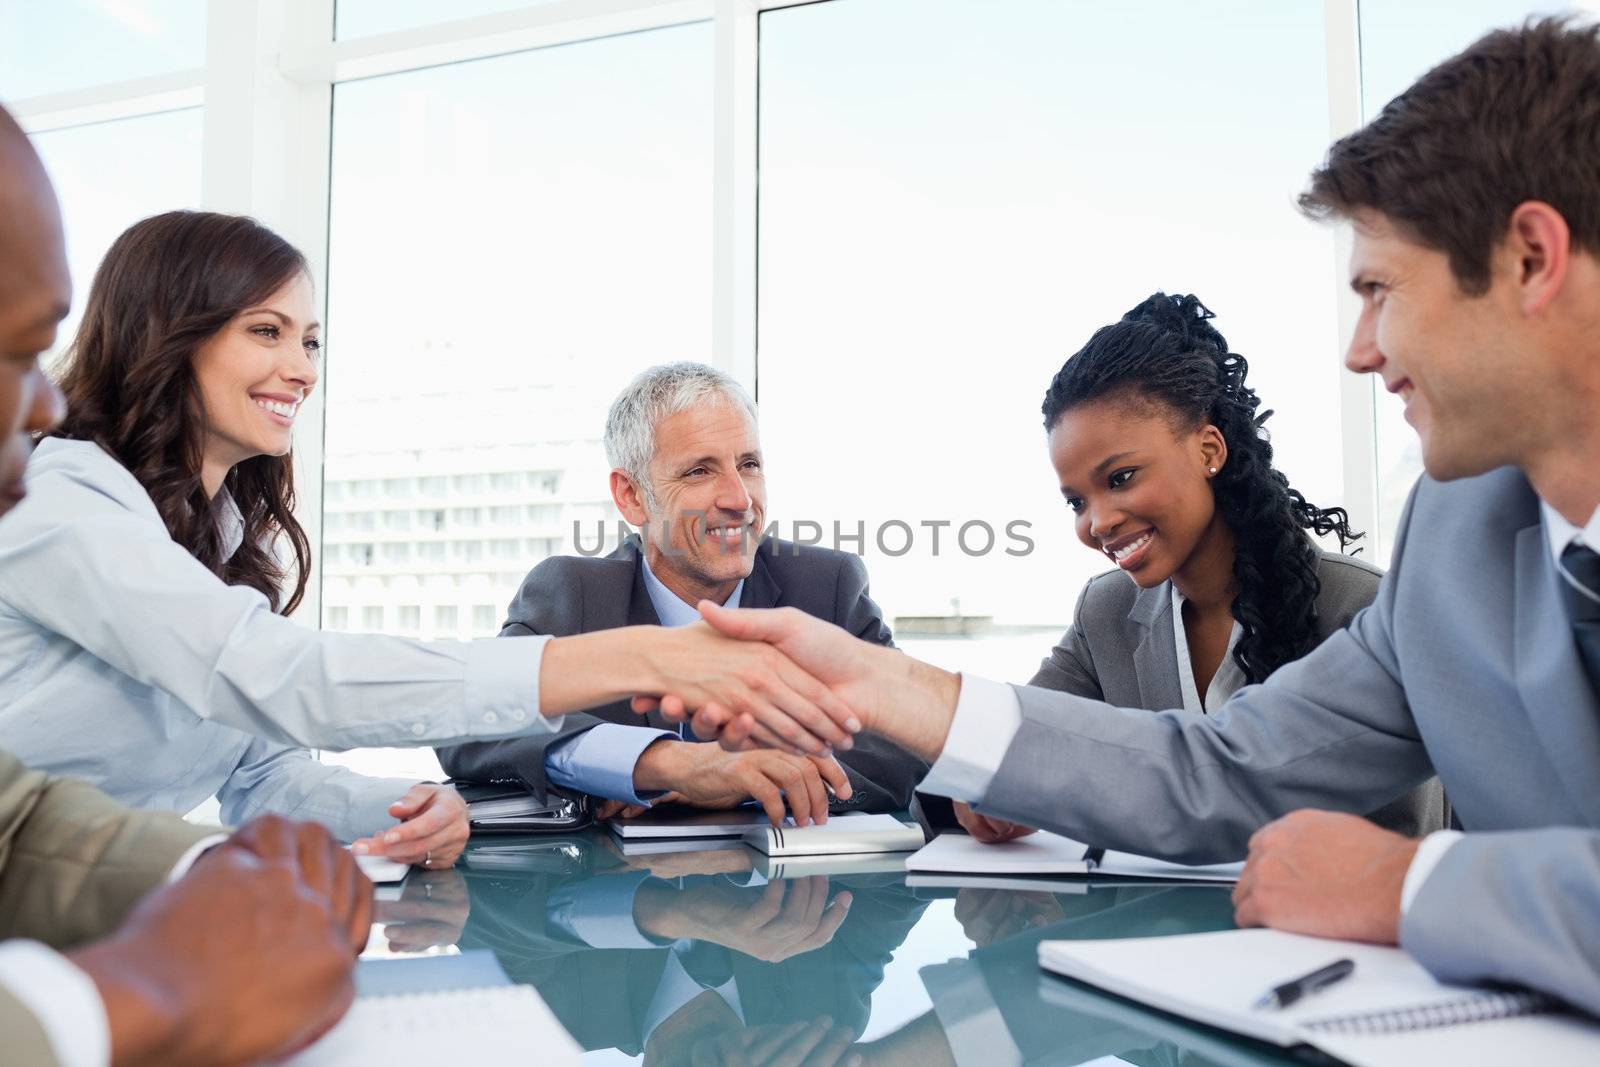 Handshake between a businesswoman and a co-worker when a meeting is ending